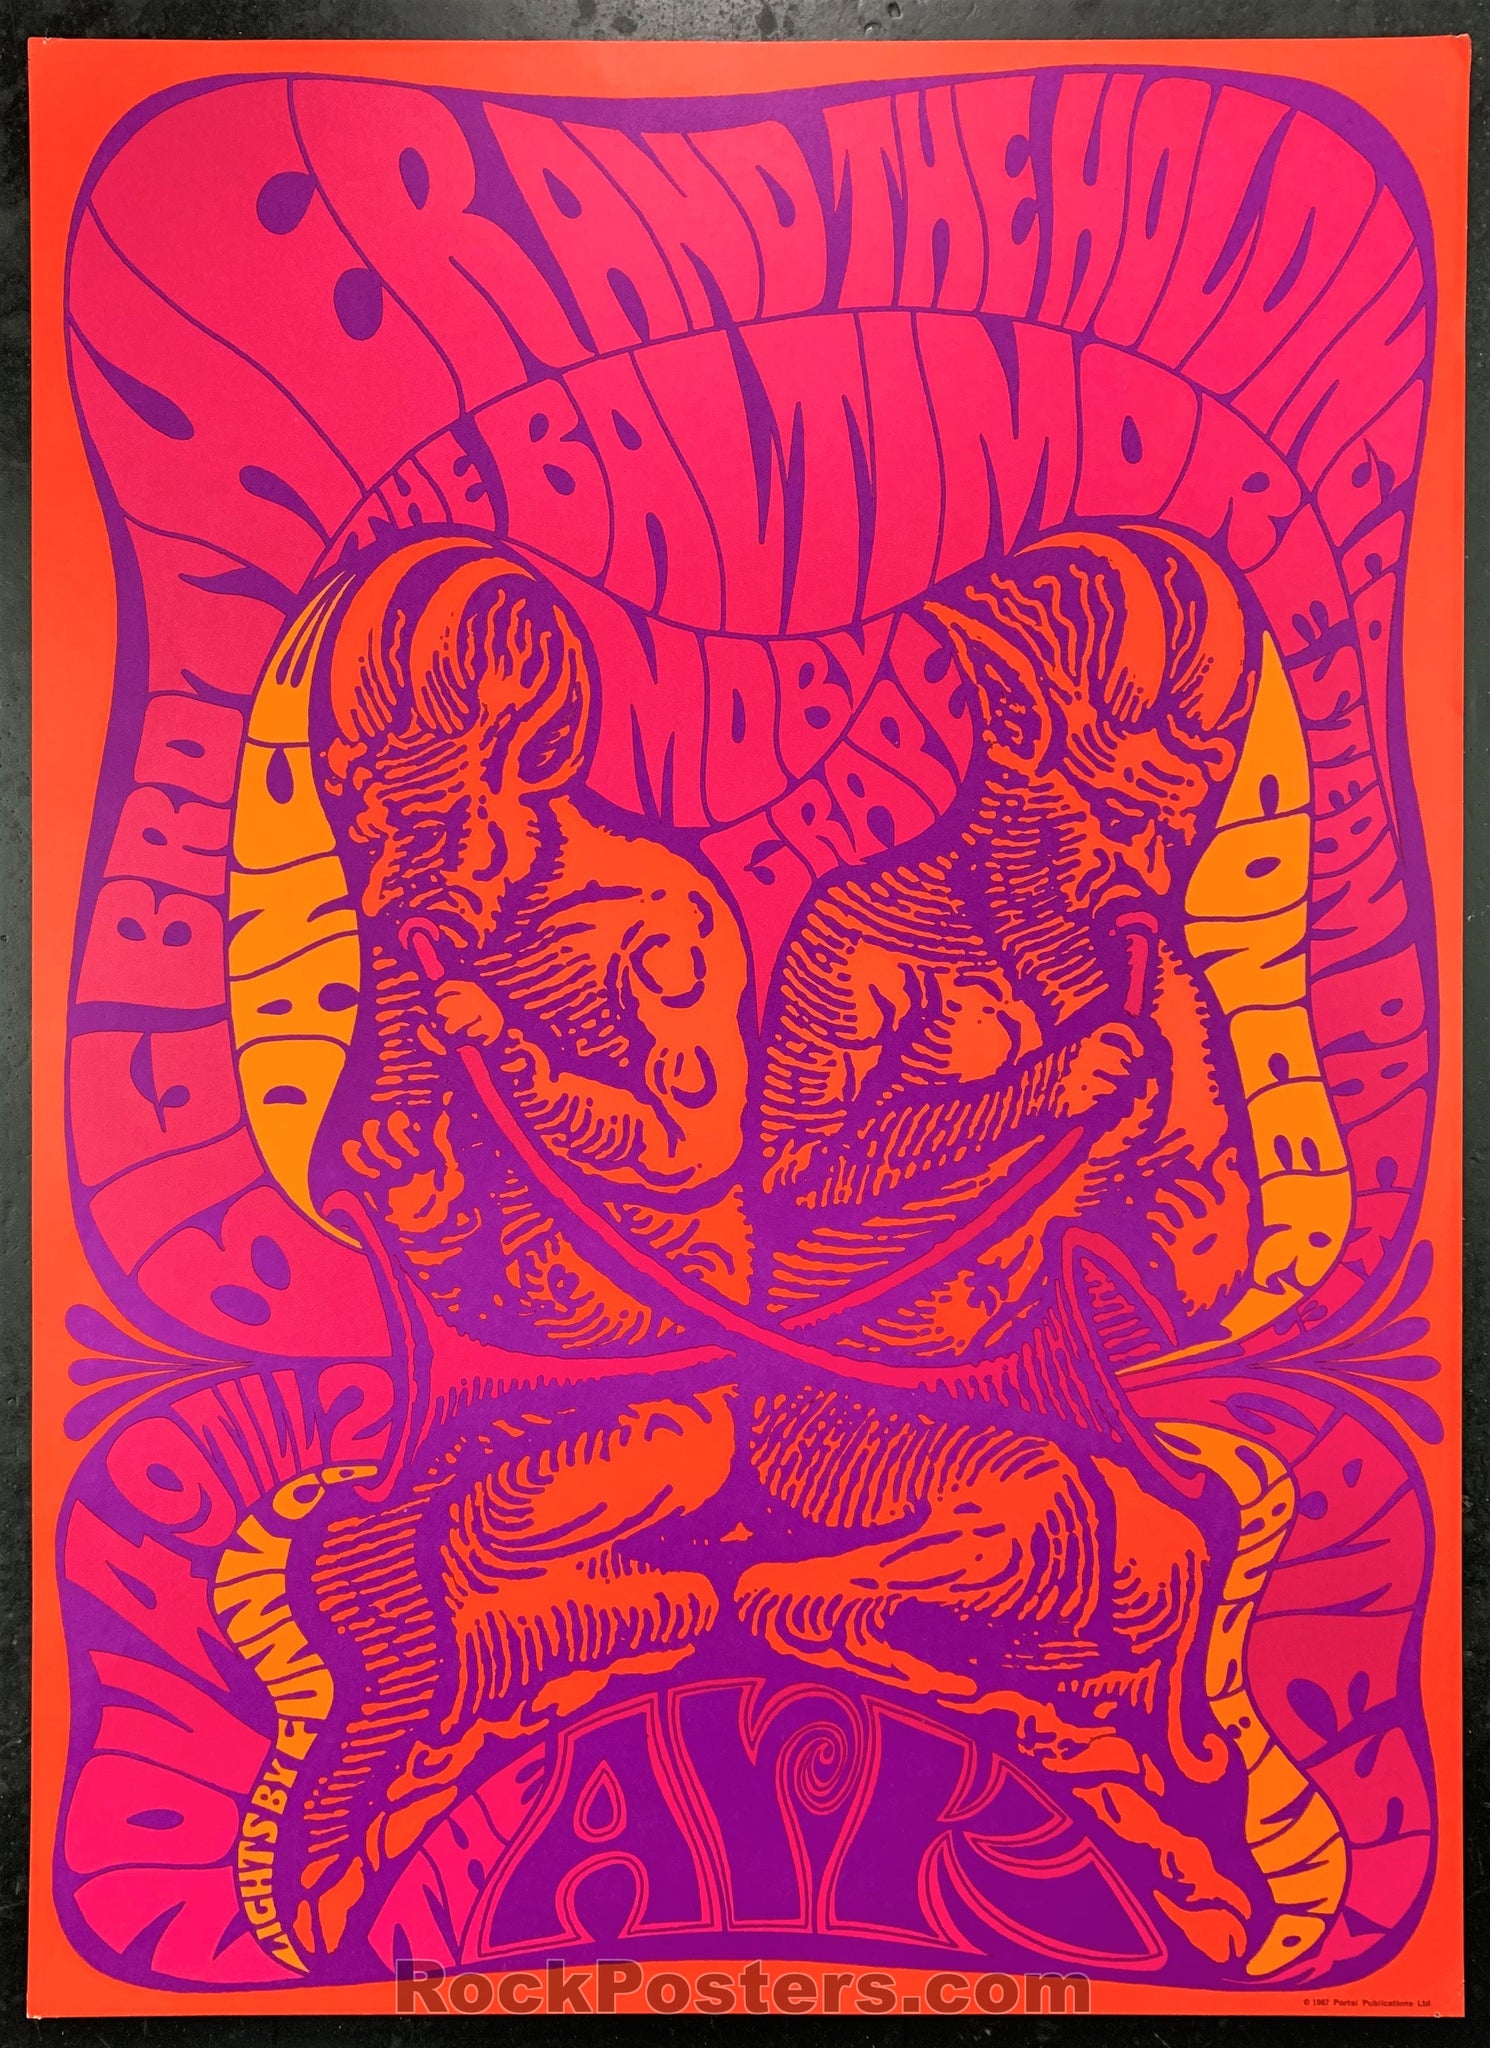 AUCTION - AOR  2.310 - Big Brother Janis Joplin - Moby Grape - 1967 Variant Poster - The Ark - Excellent